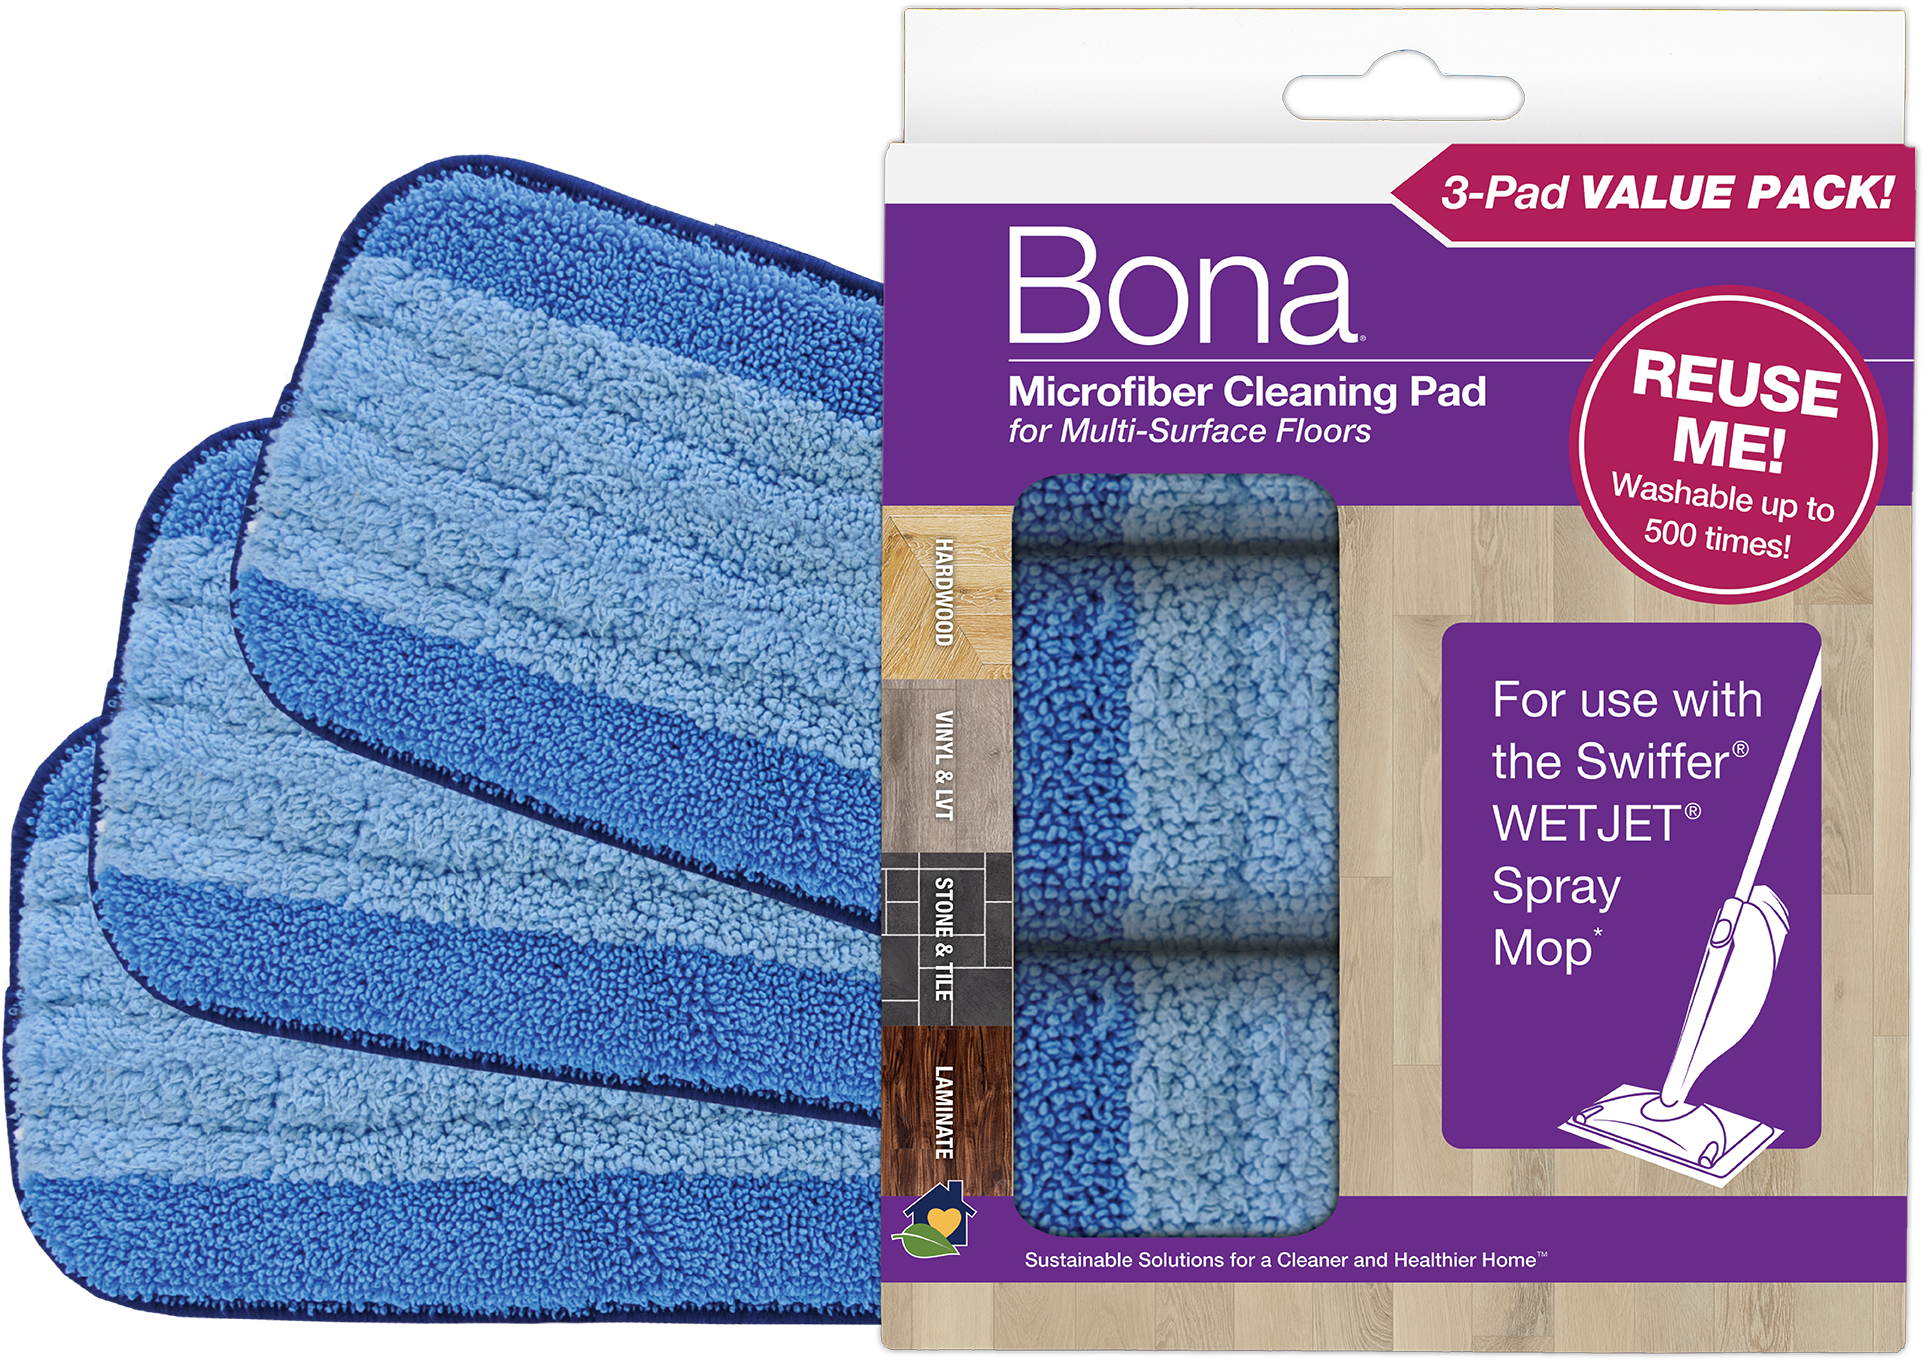 Microfiber Mop Pads Compatible with Swiffer WetJet (2 Pack)